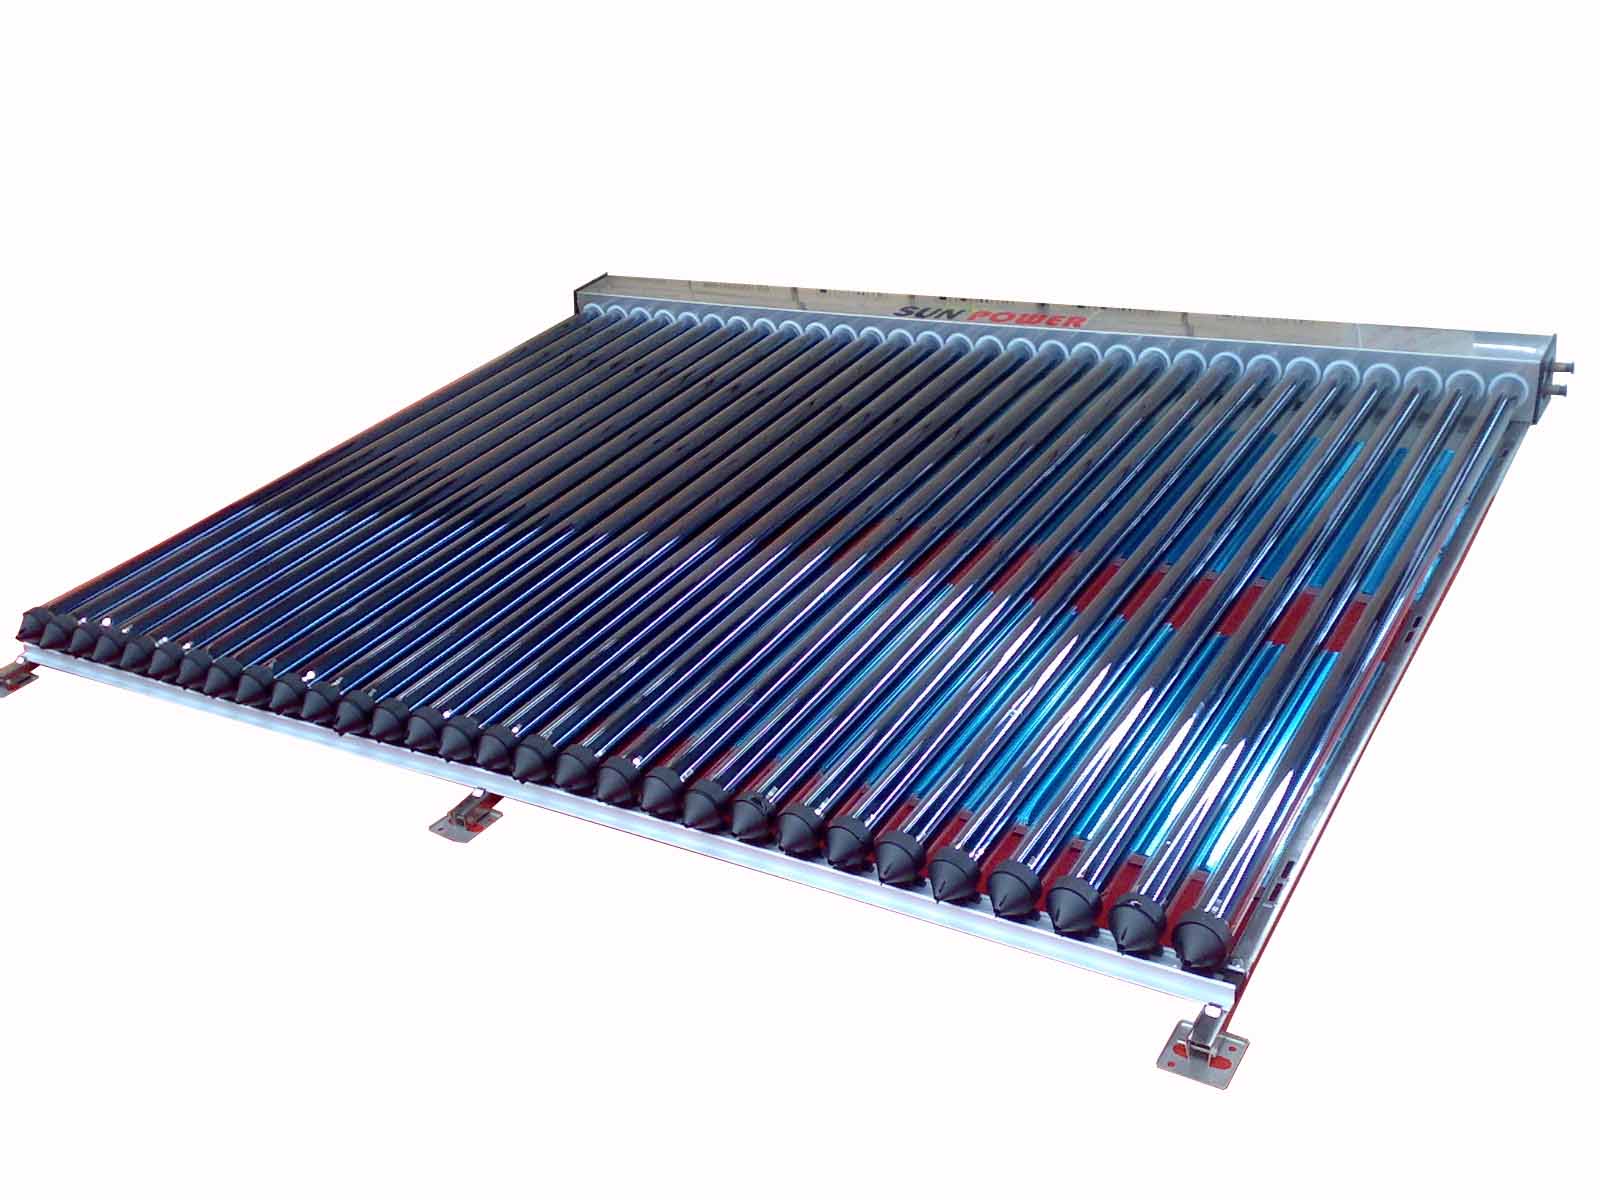 Outdoor Pressurized Flat plate U pipe Solar collector